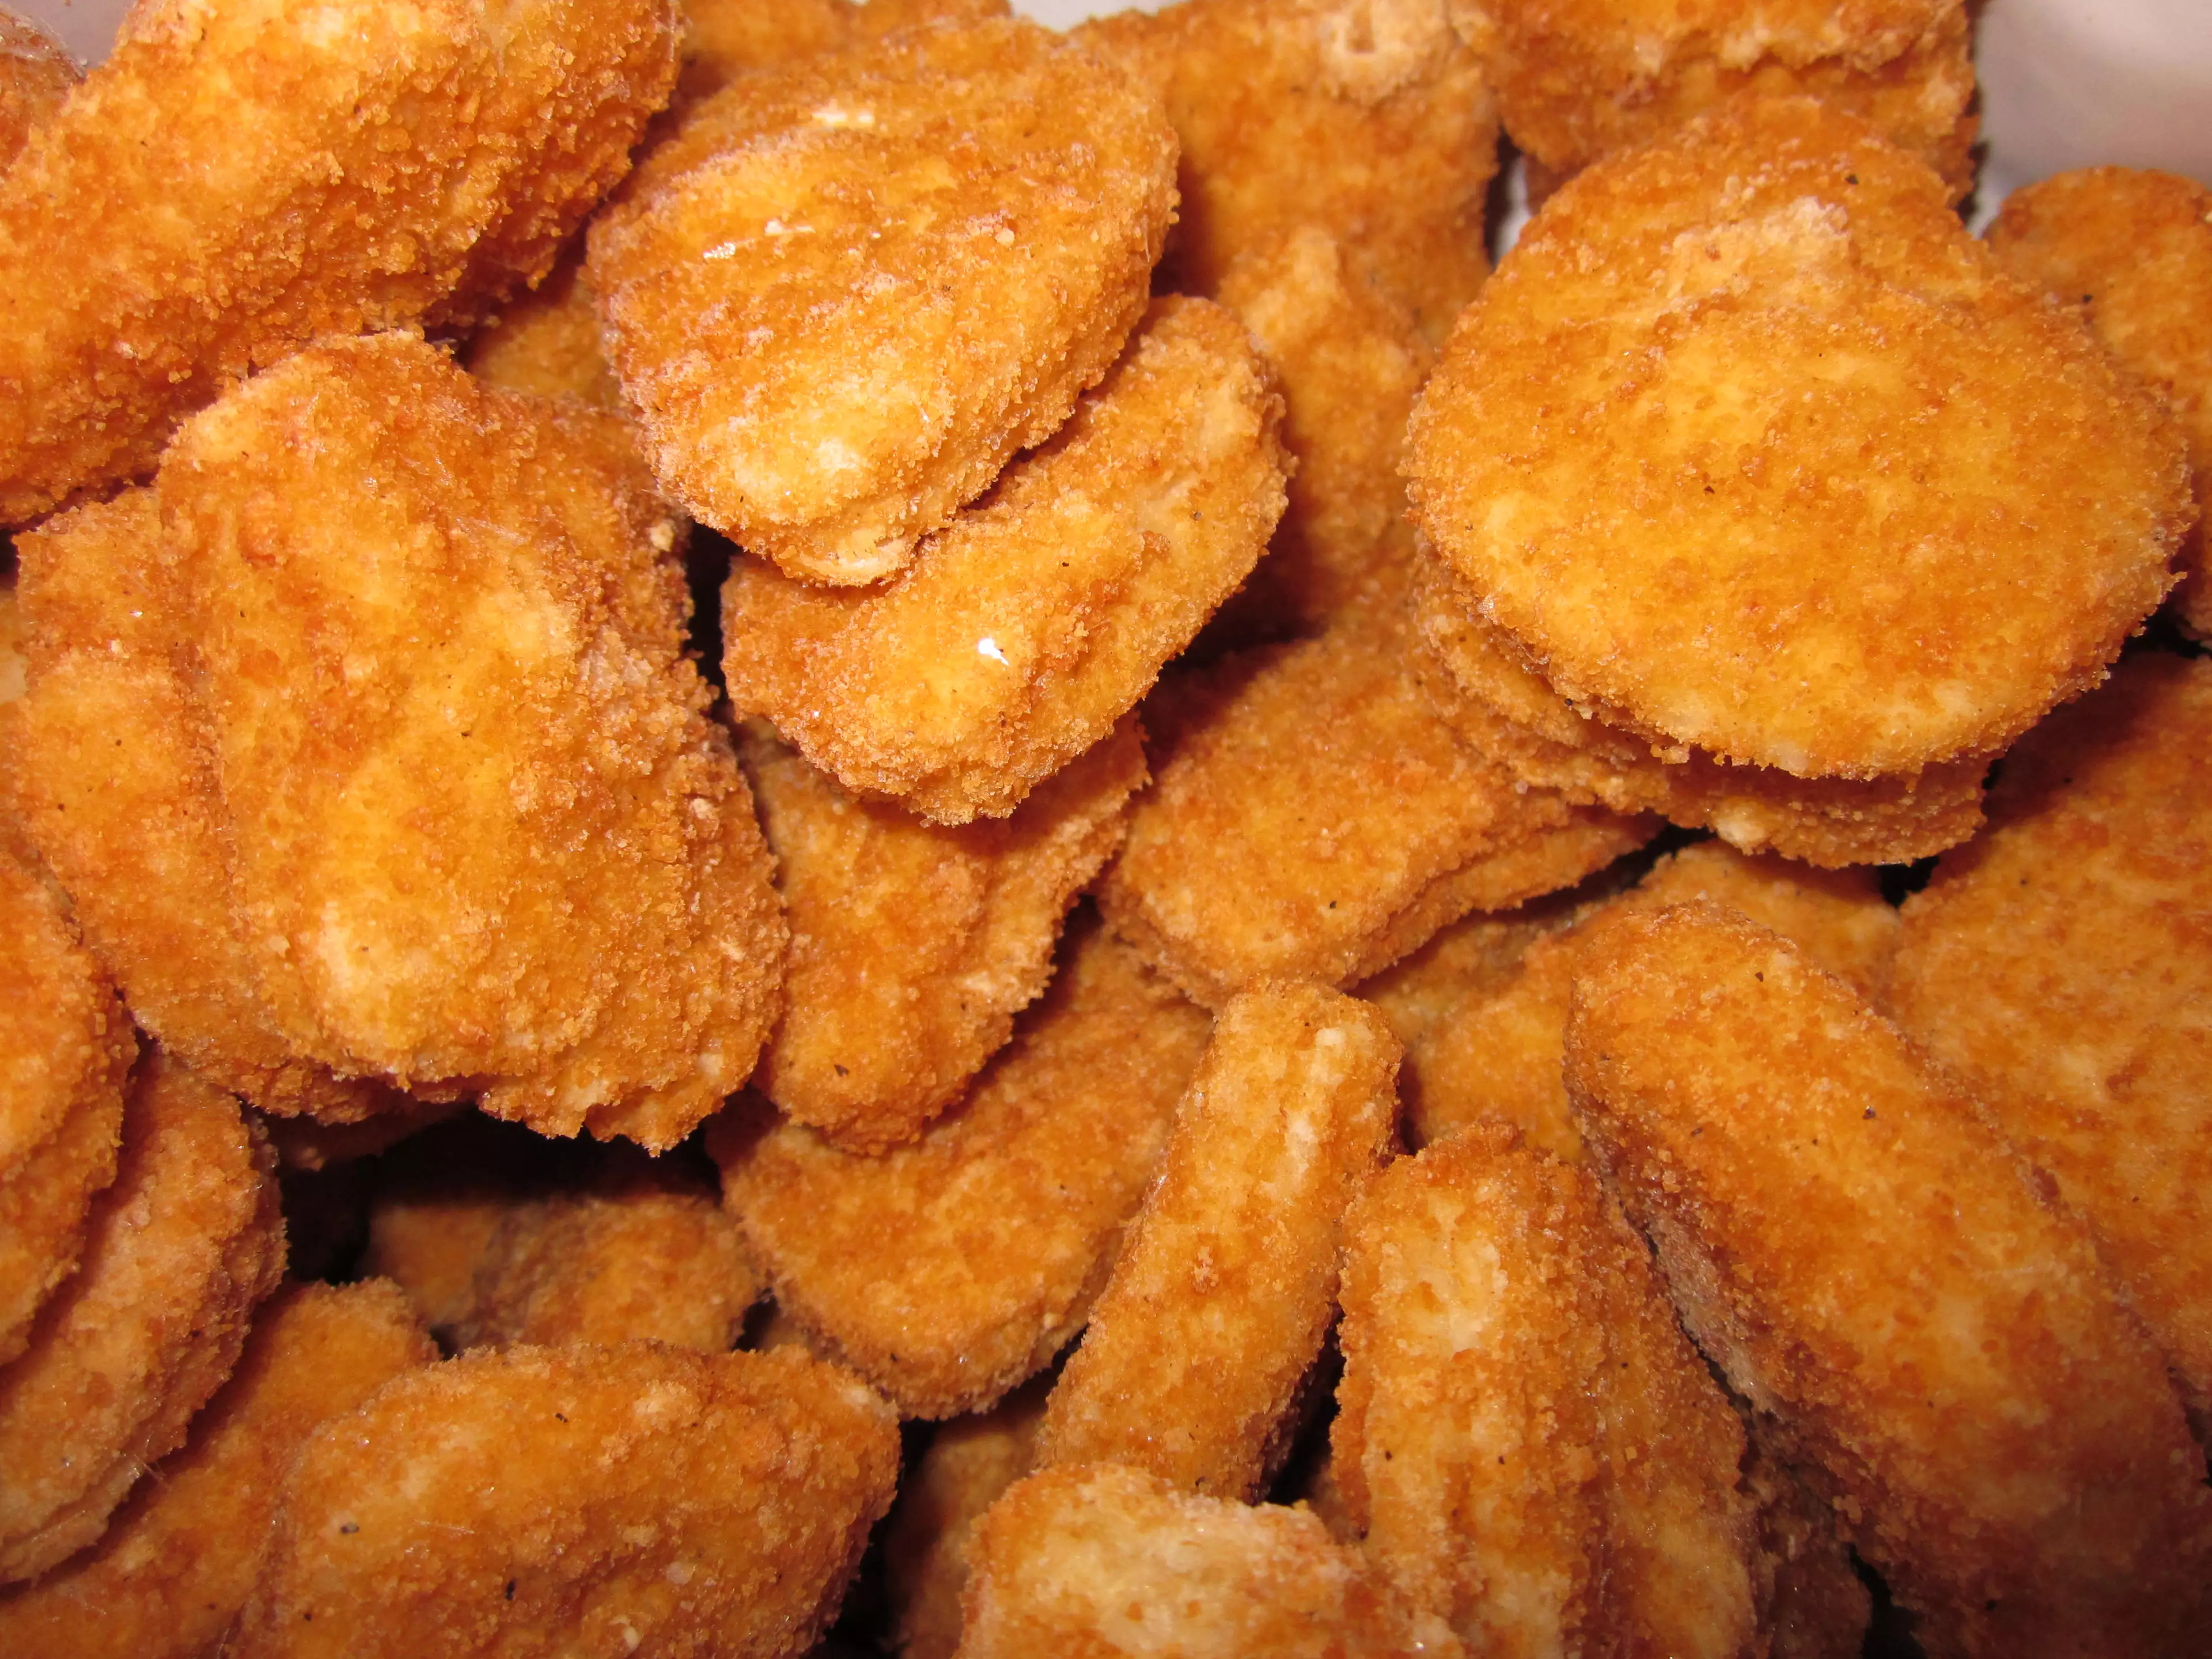 Liverpool branch manager Ellie Brothers believes the nostalgia of chicken nuggets is part of the pizza's popularity (